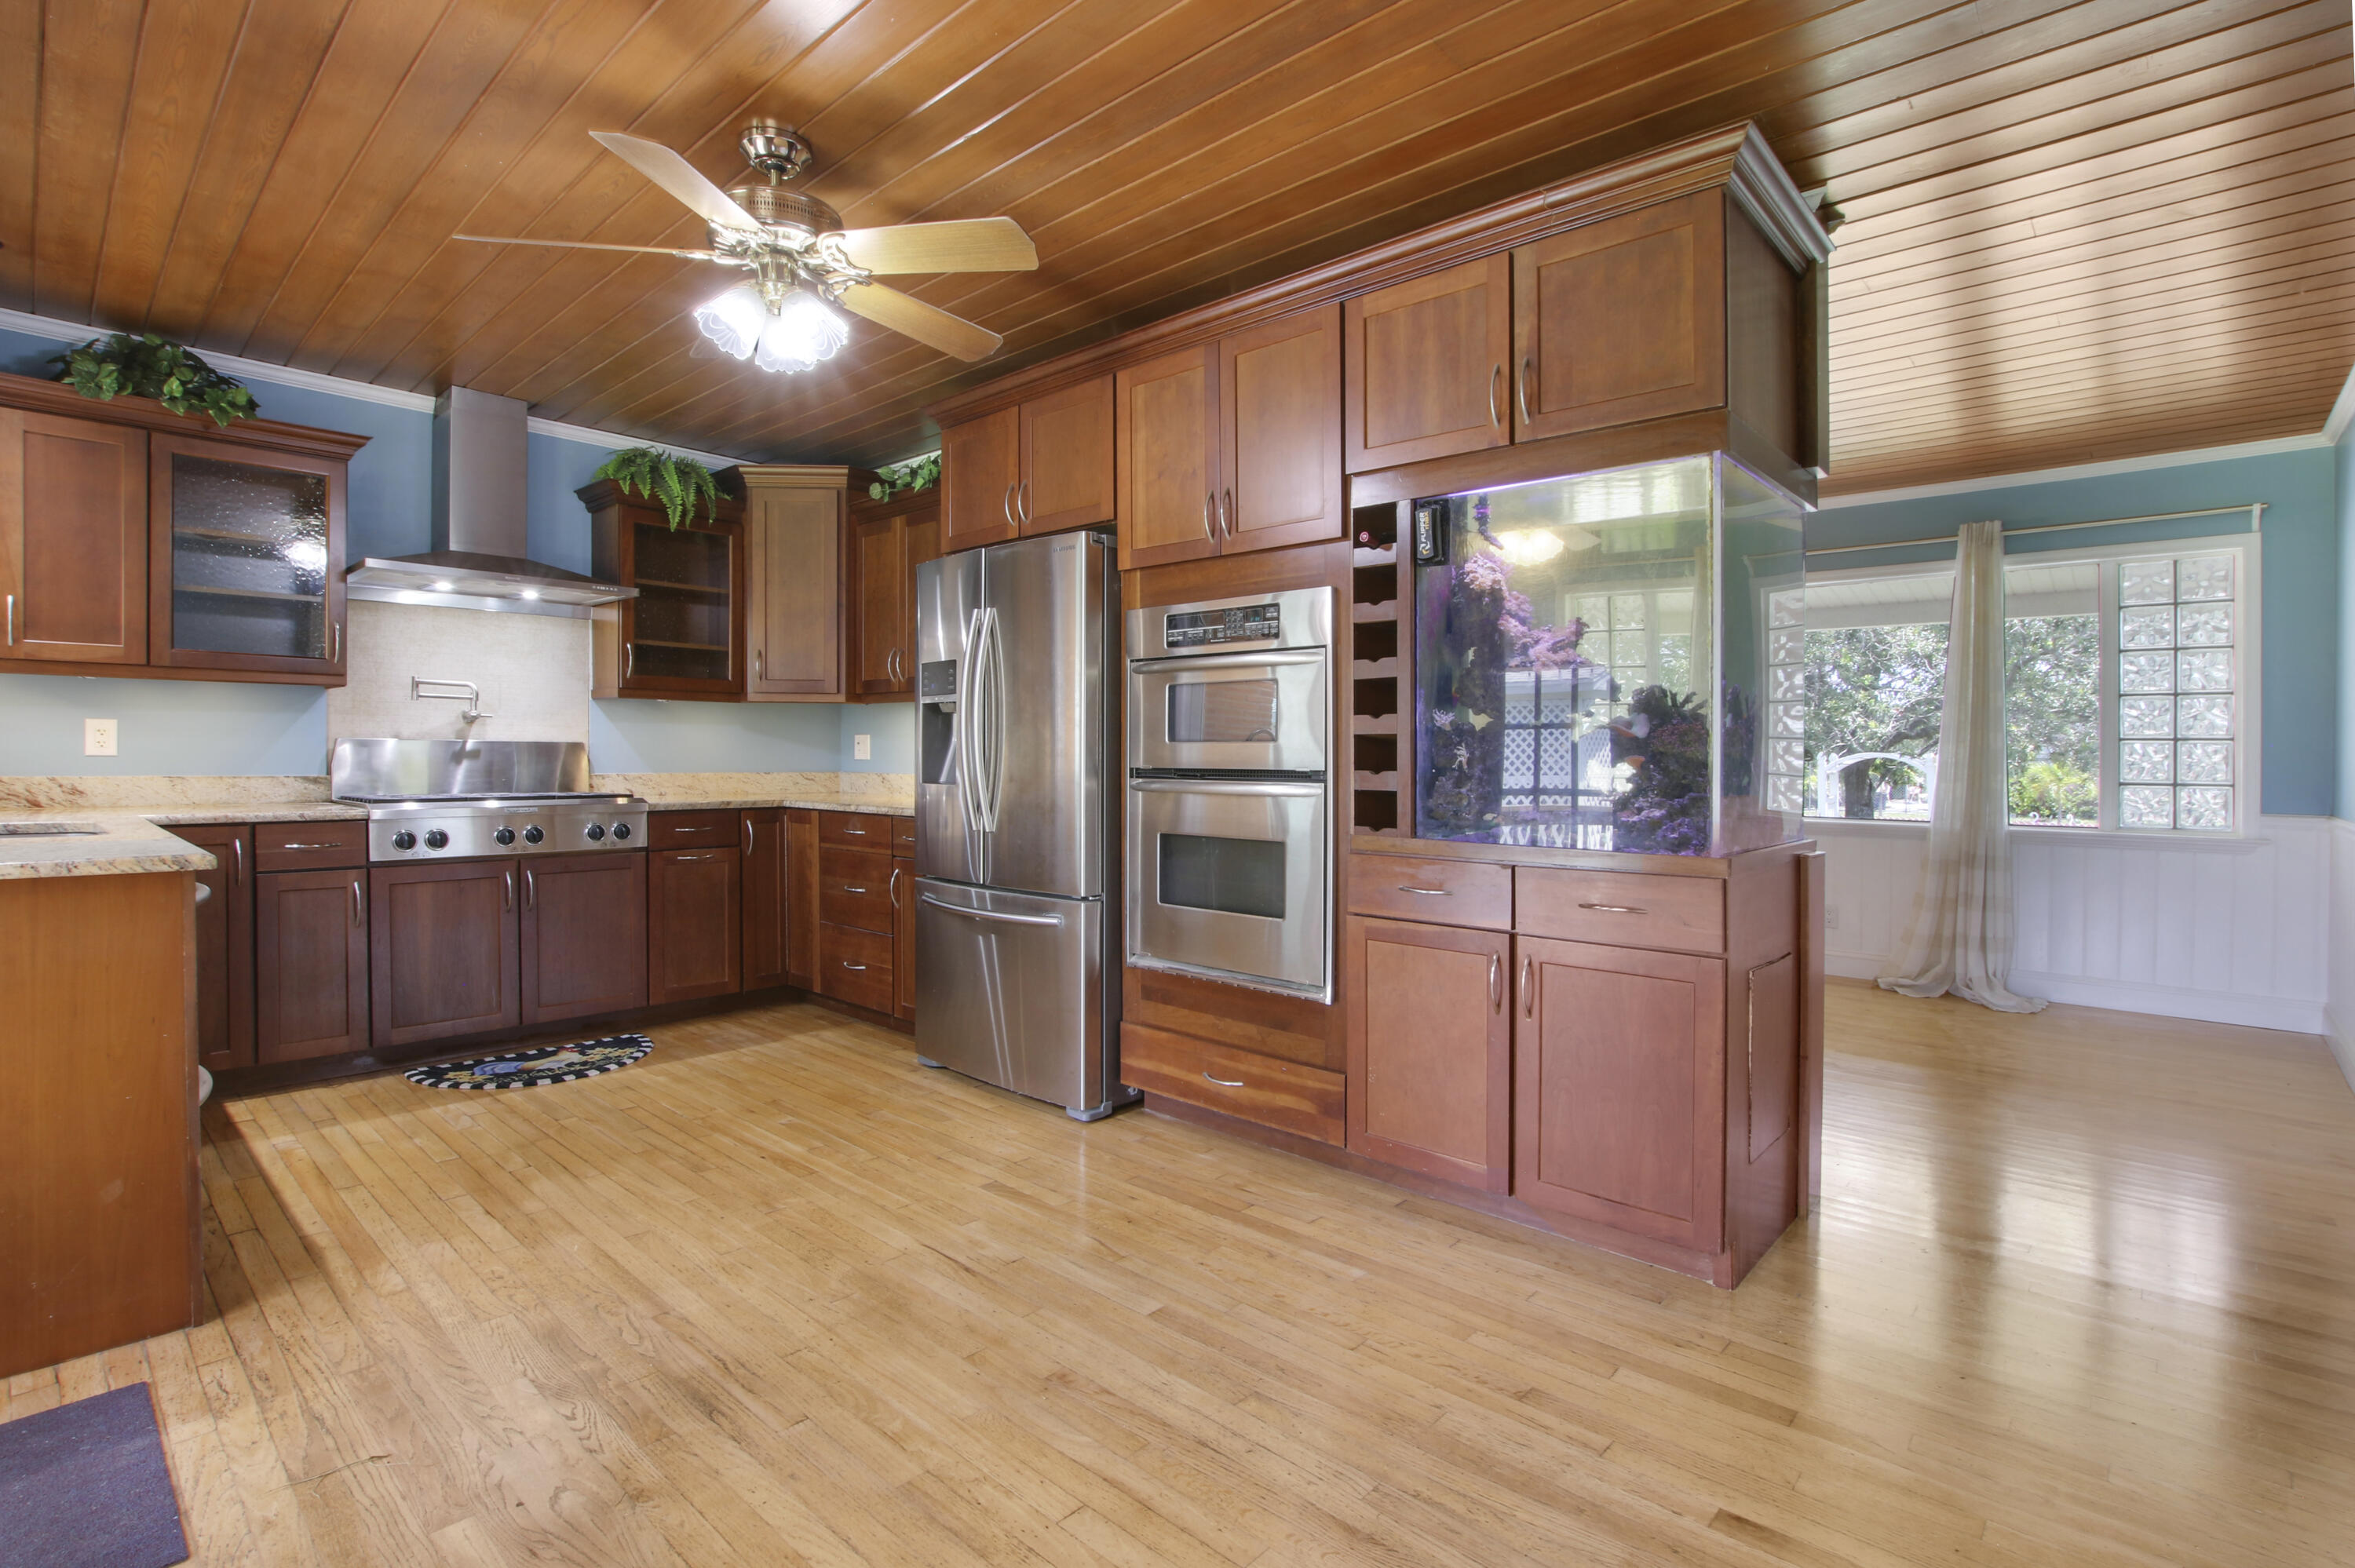 a kitchen with stainless steel appliances kitchen island granite countertop a refrigerator oven stove a sink a dining table and chairs with wooden floor